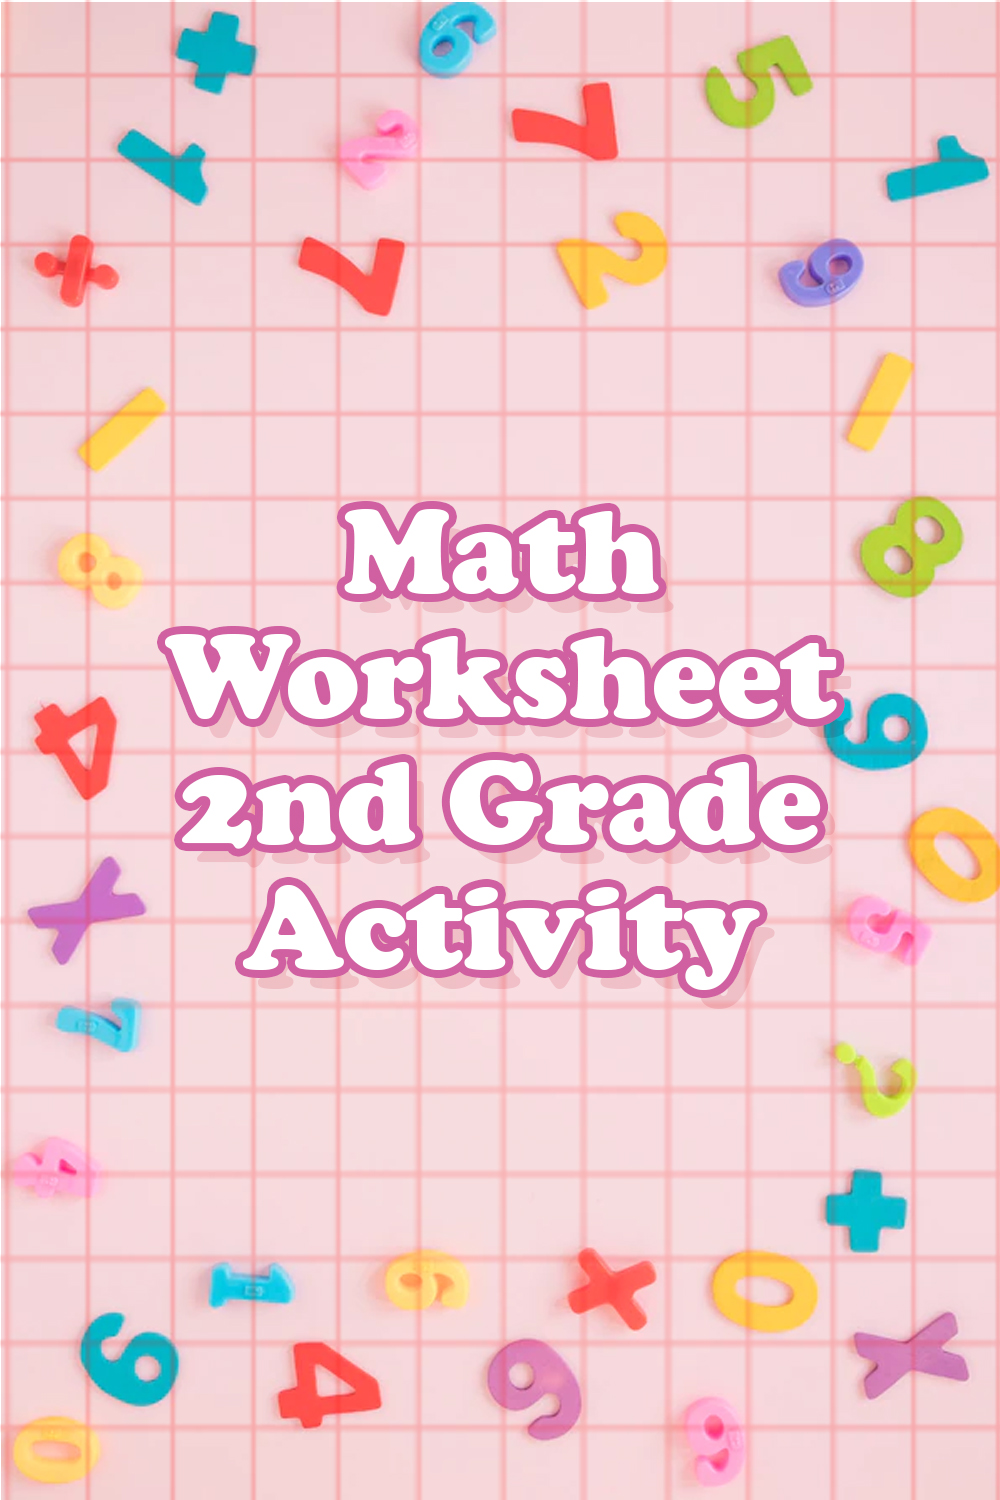 6 Images of Math Worksheets 2nd Grade Activity